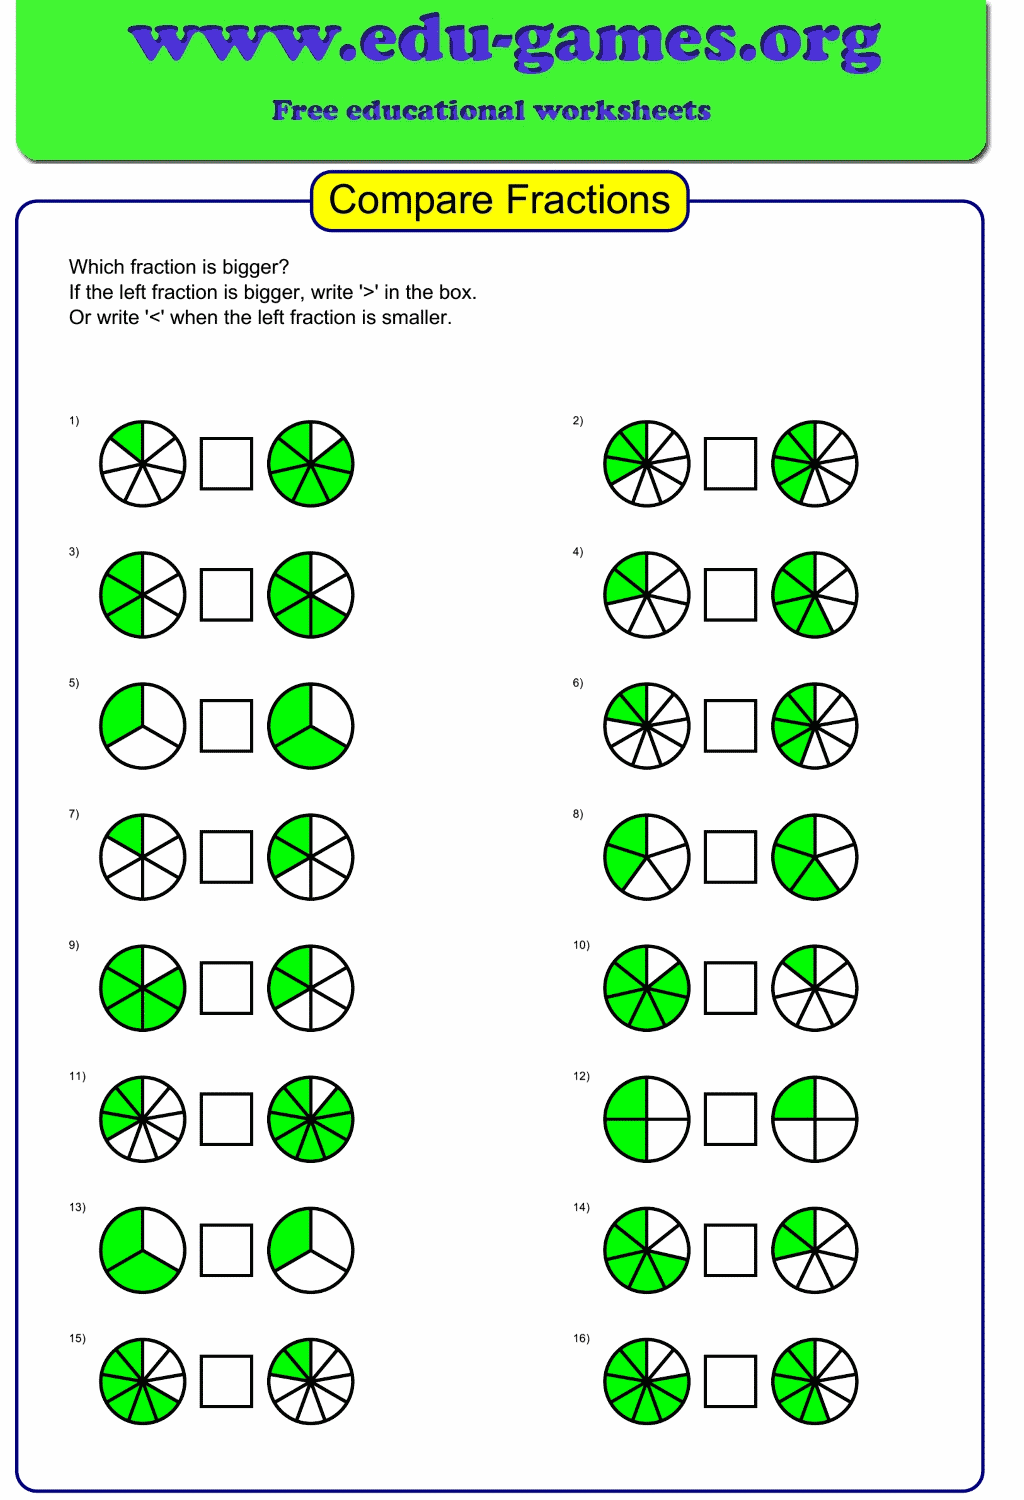 compare-graphical-fractions-worksheet-free-printable-worksheets